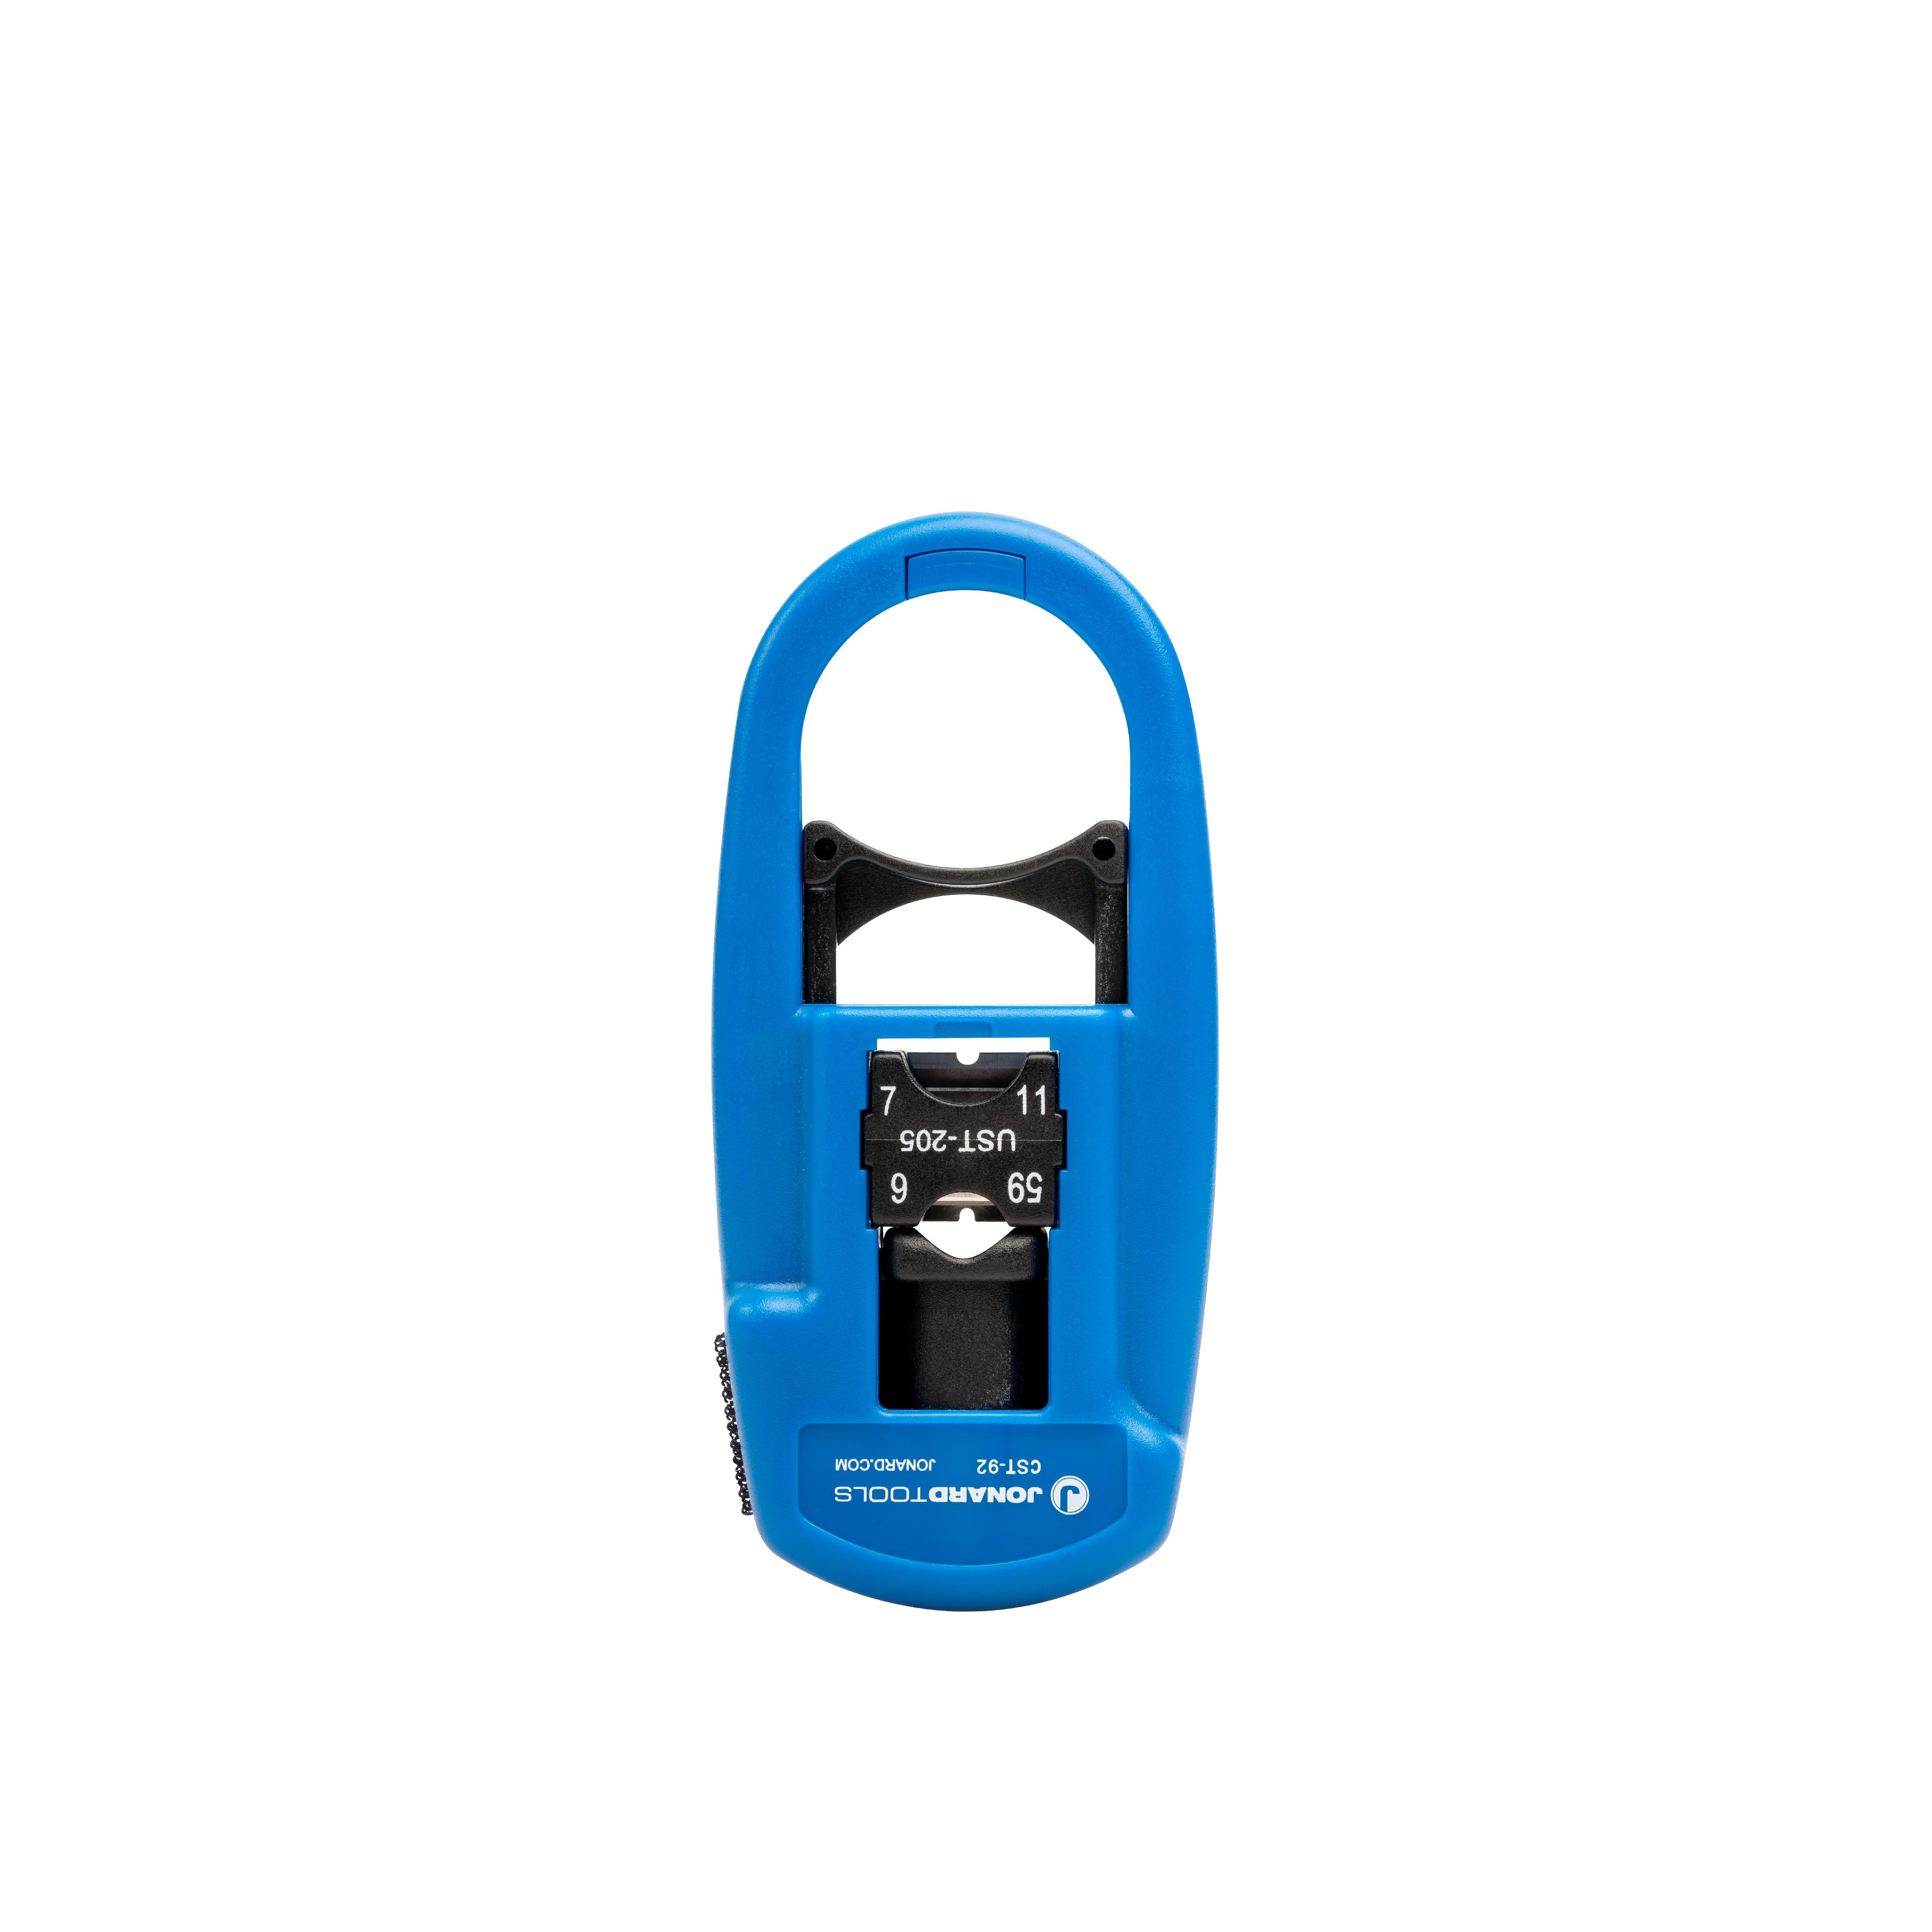 【CST-92】Coaxial Cable Stripper